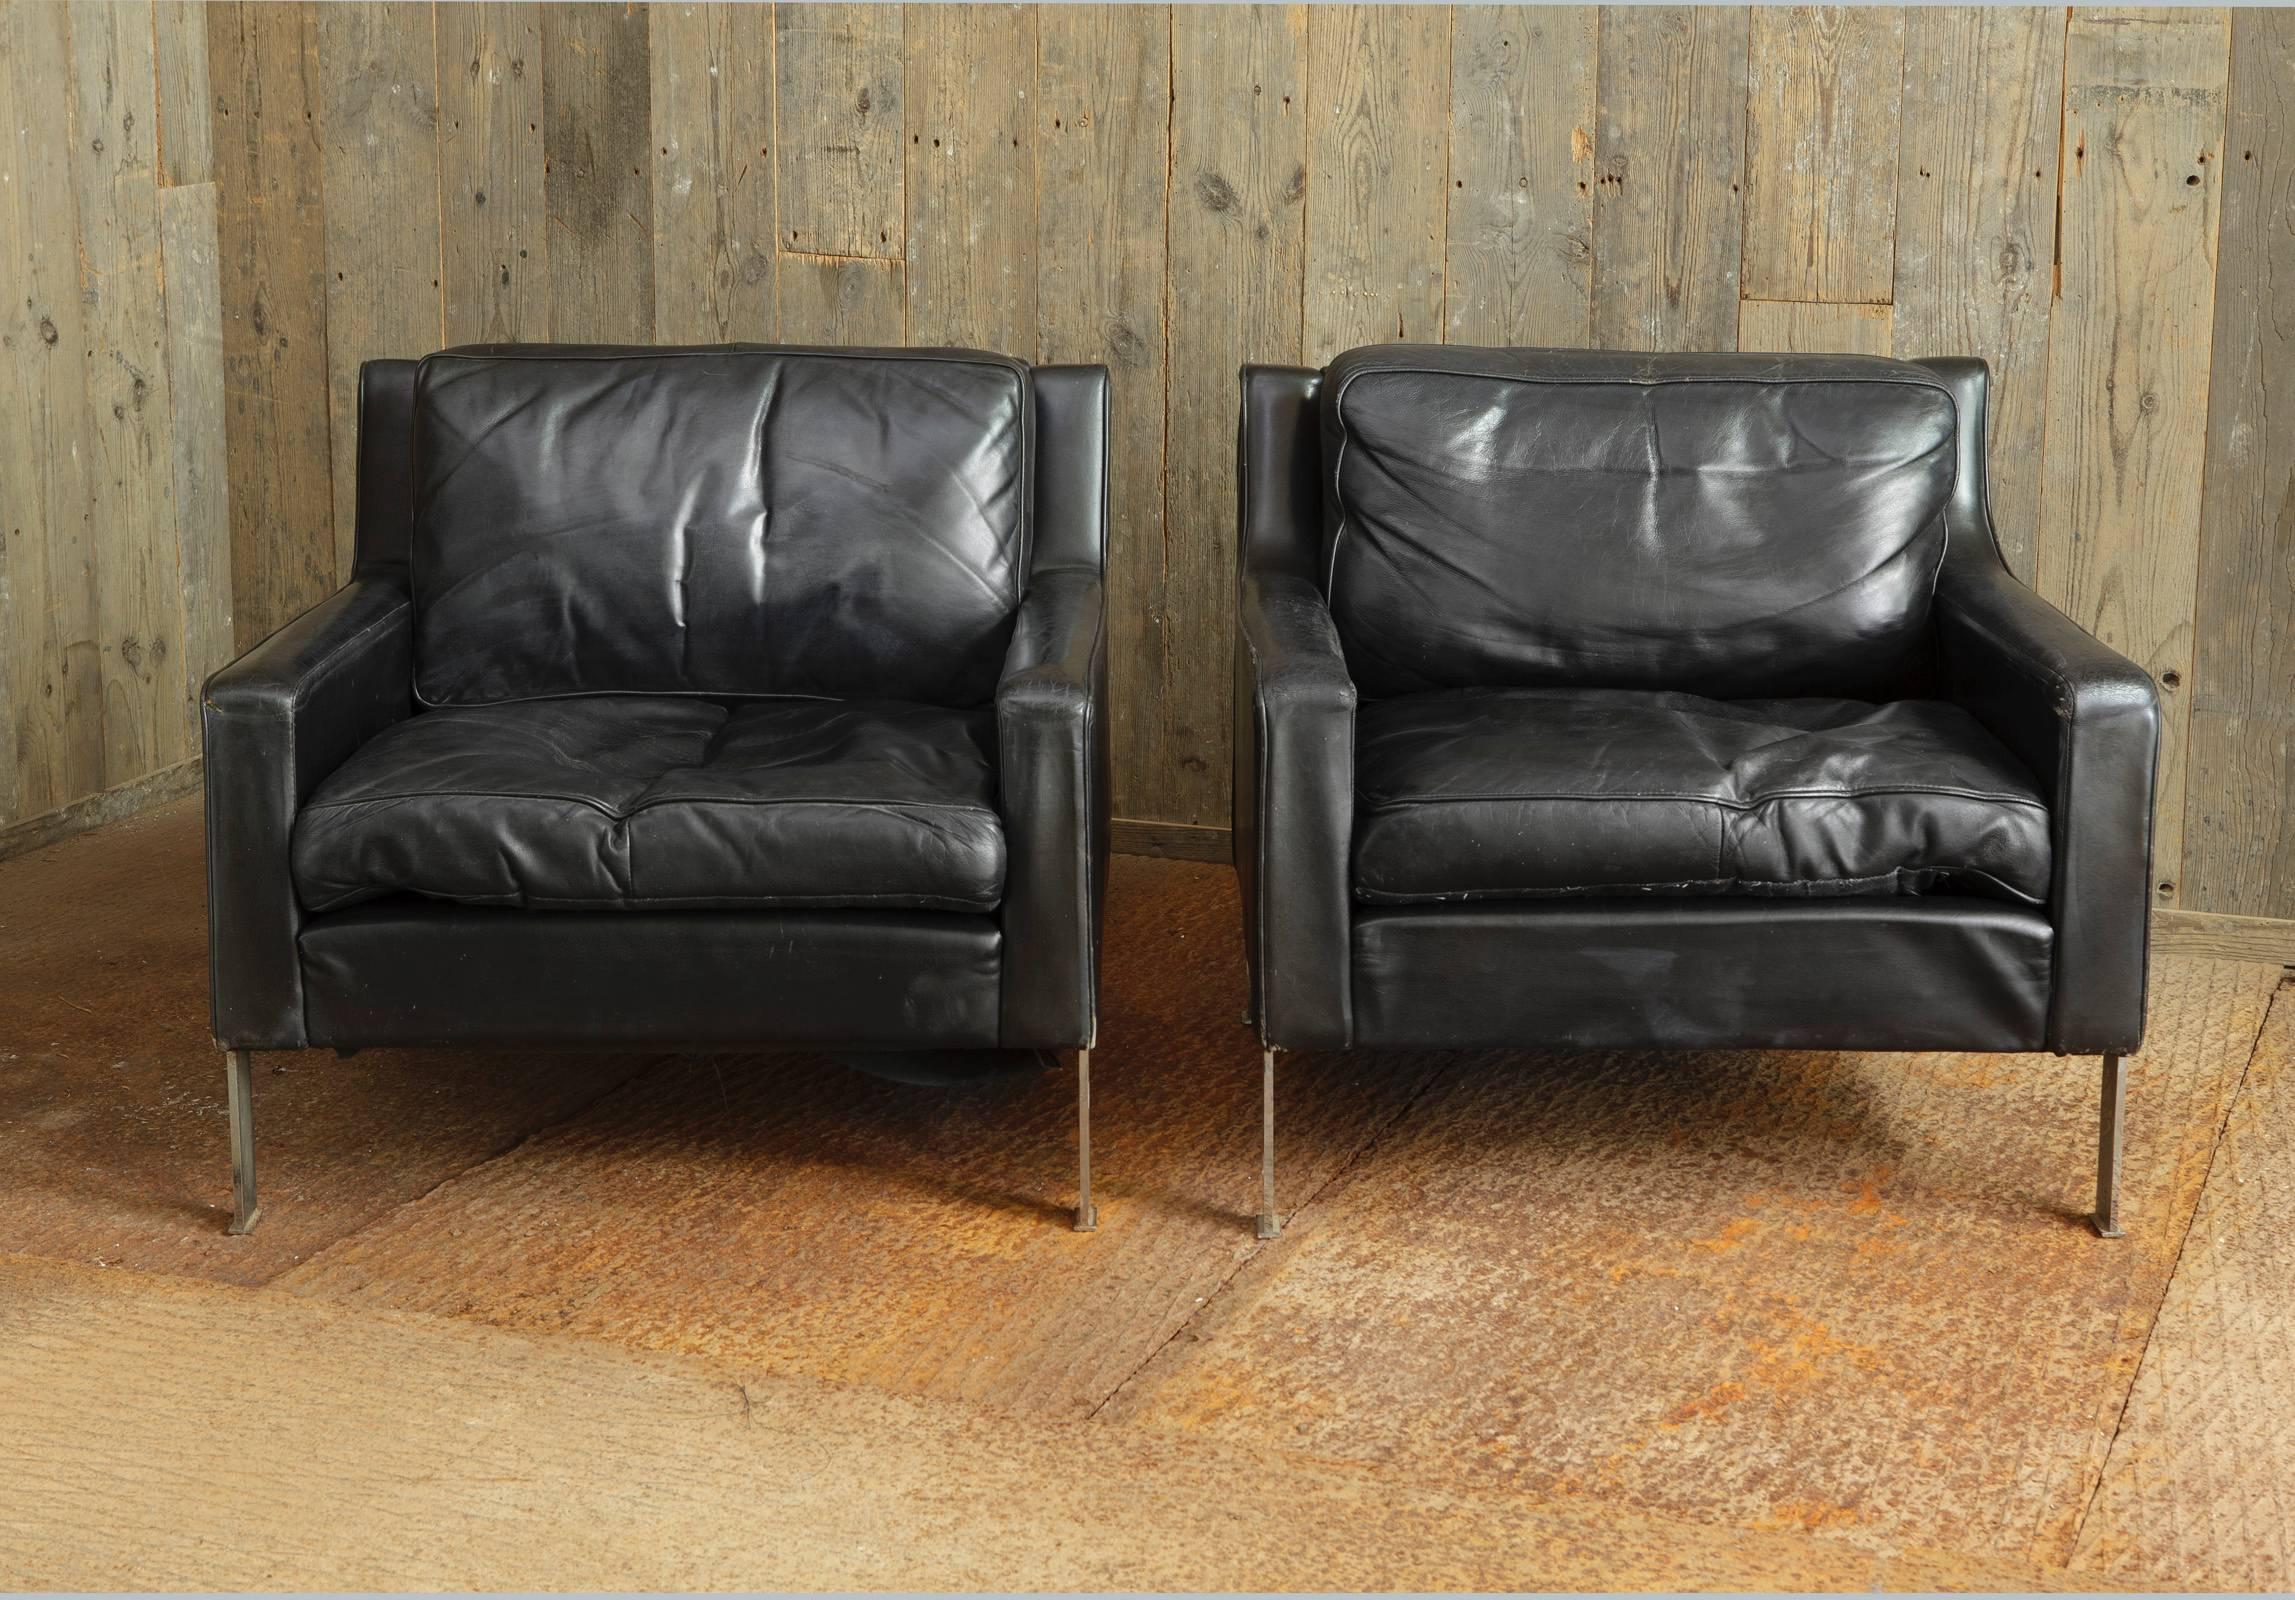 Pair of 1970s European black leather club chairs or fauteuils. Provenance: Private 1970s mansion on Mallorca.